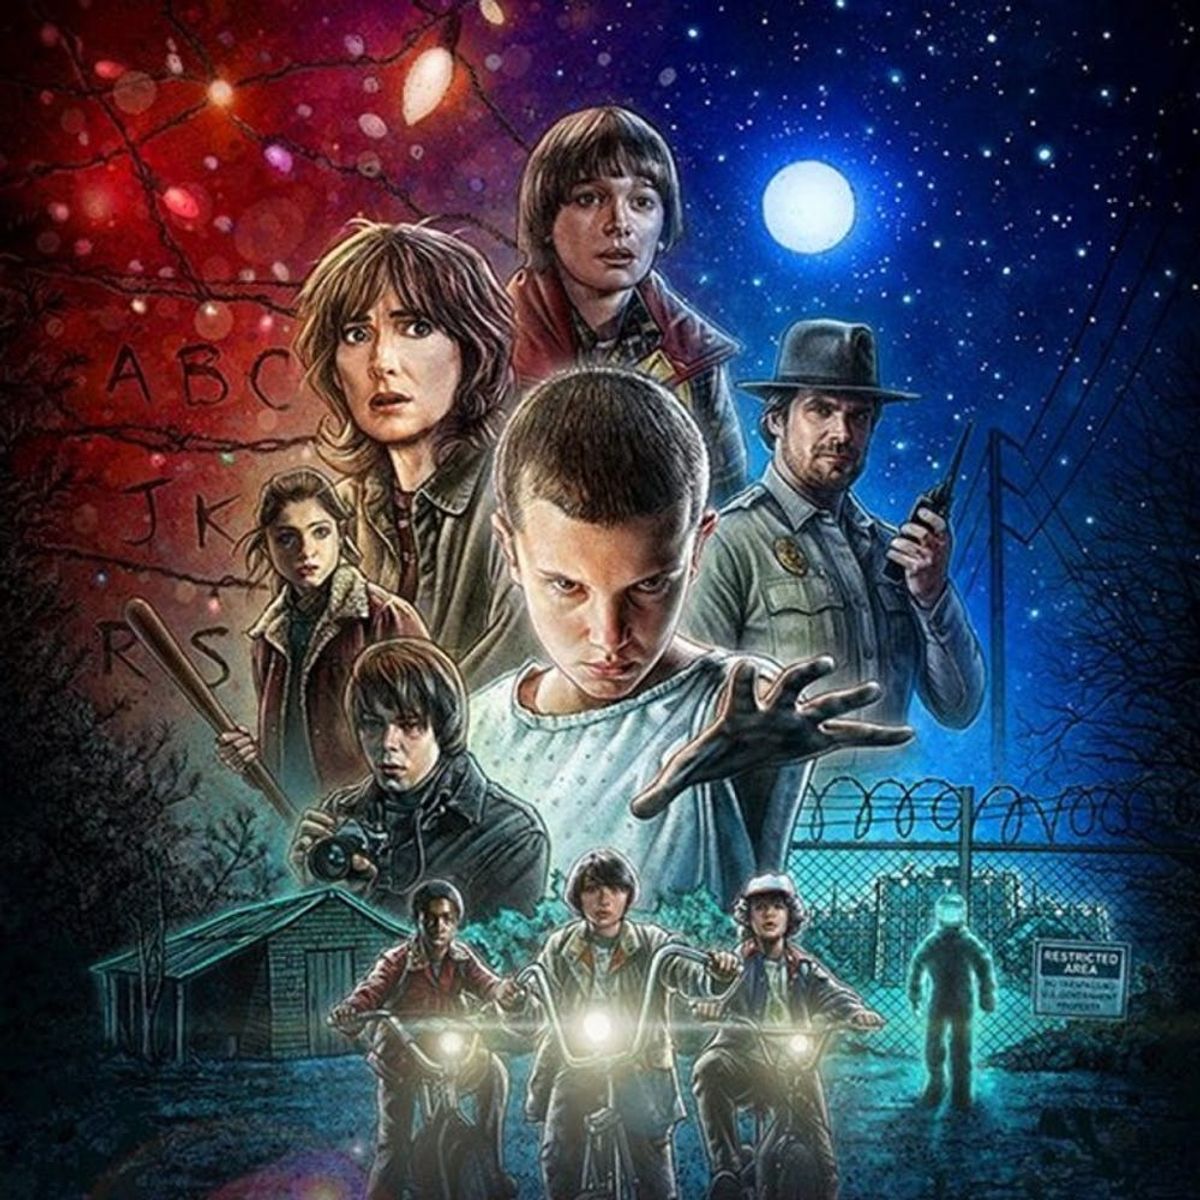 Google Is Hosting a Stranger Things Scavenger Hunt, and You’re Invited